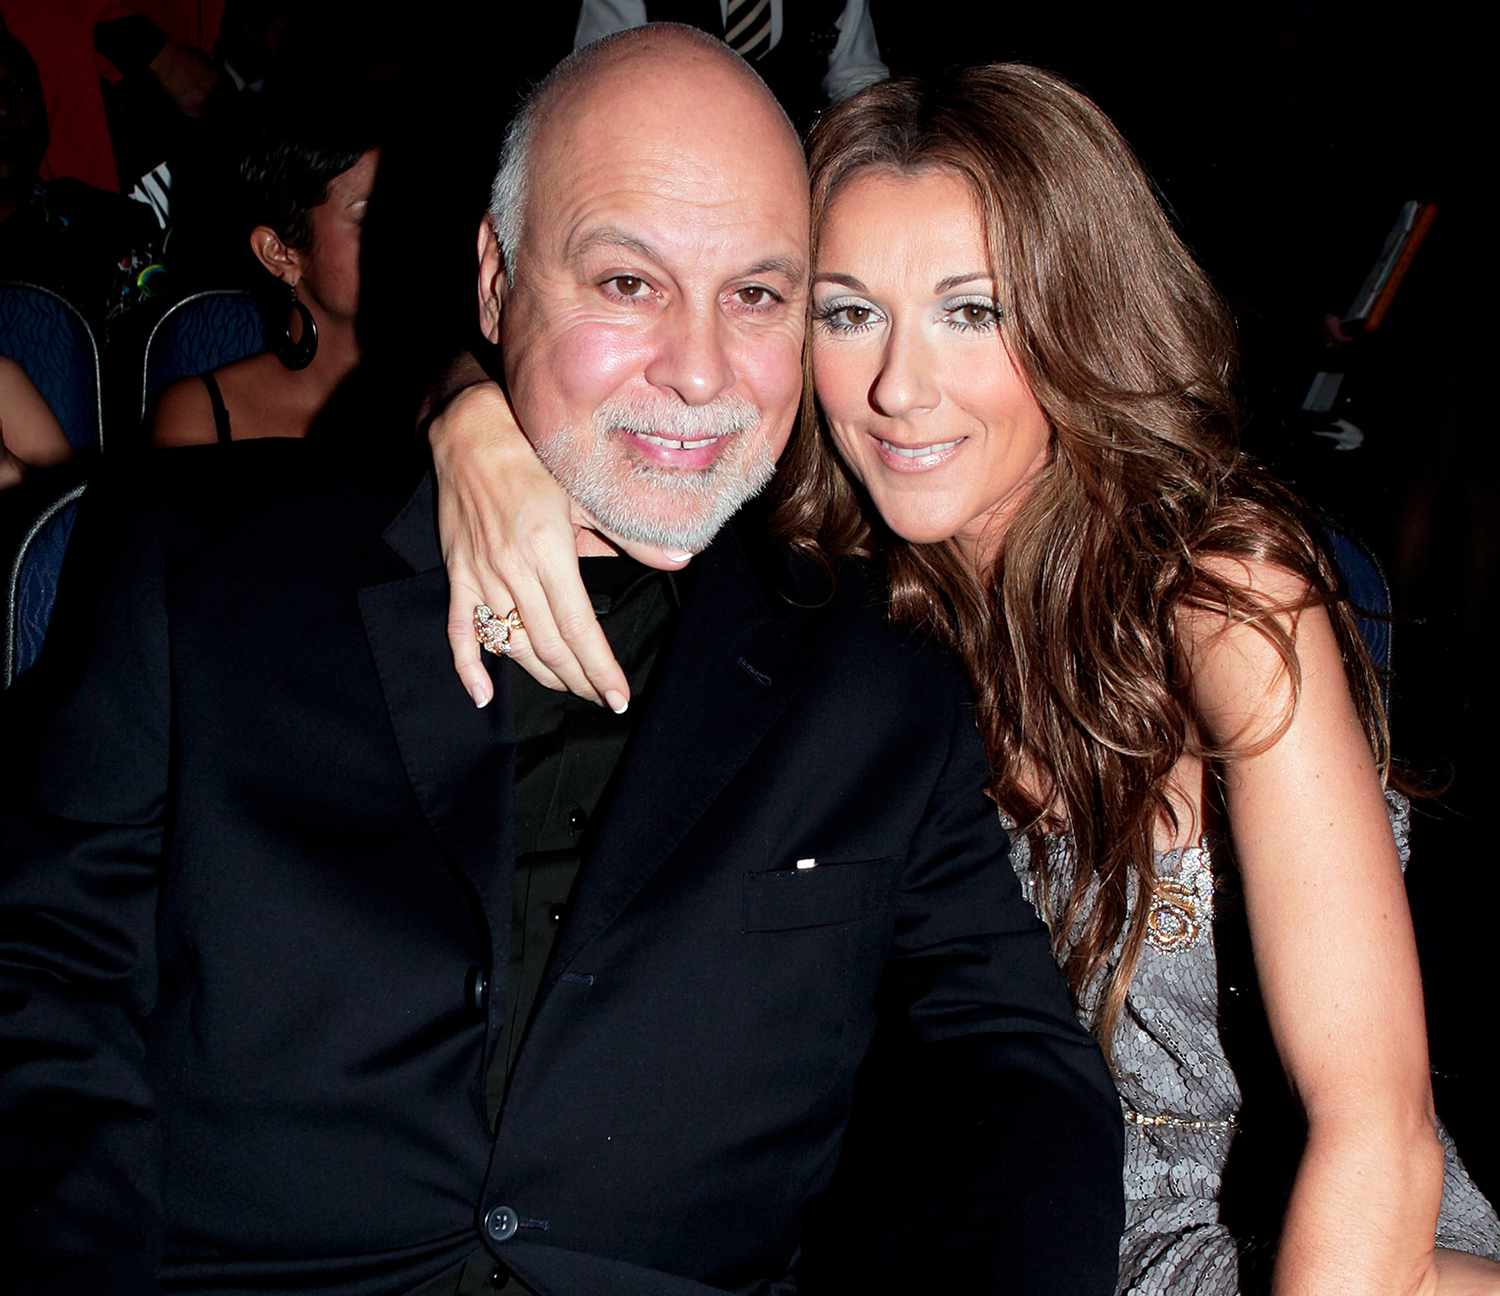 Singer Celine Dion (R) and husband Rene Angelil in the audience during the 2007 American Music Awards held at the Nokia Theatre L.A. LIVE on November 18, 2007 in Los Angeles, California.